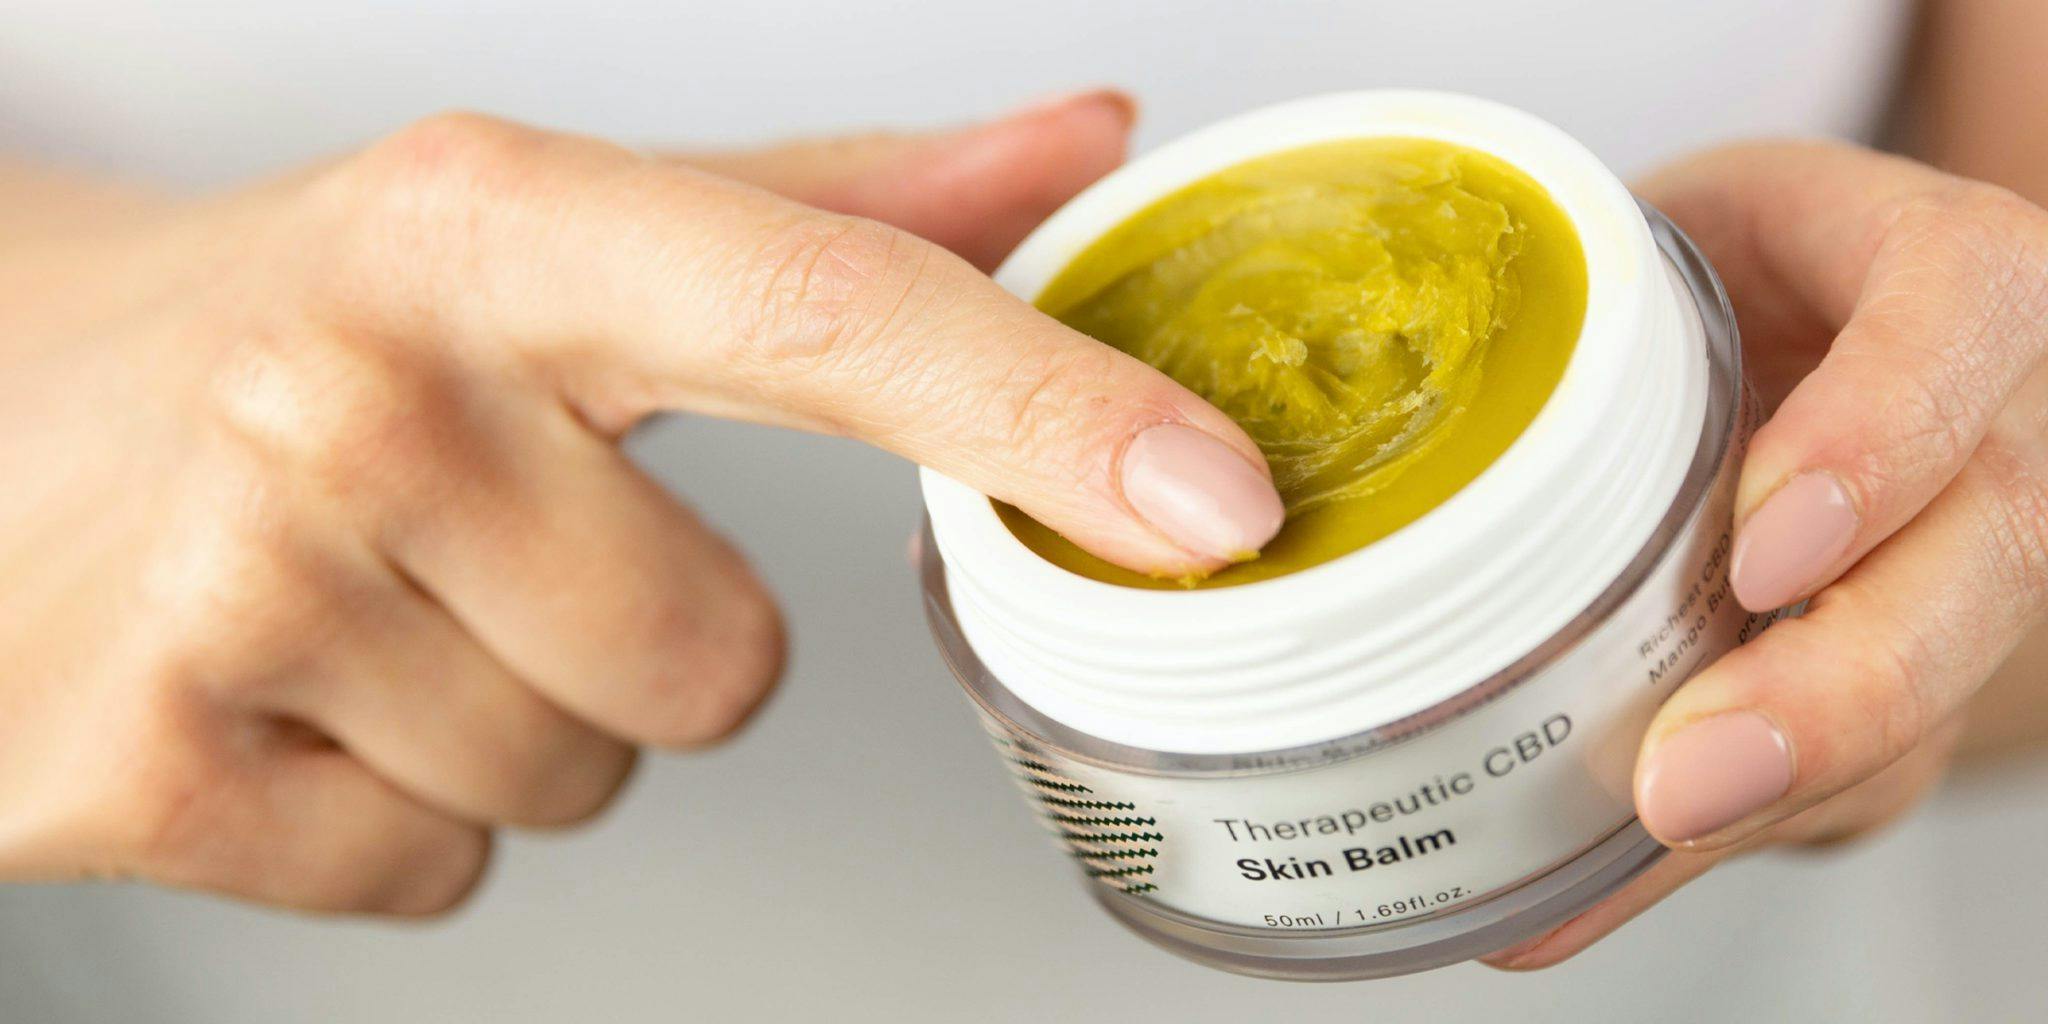 closeup woman's pair of hands holding a cannabis topical cream, one finger rubbing the cream